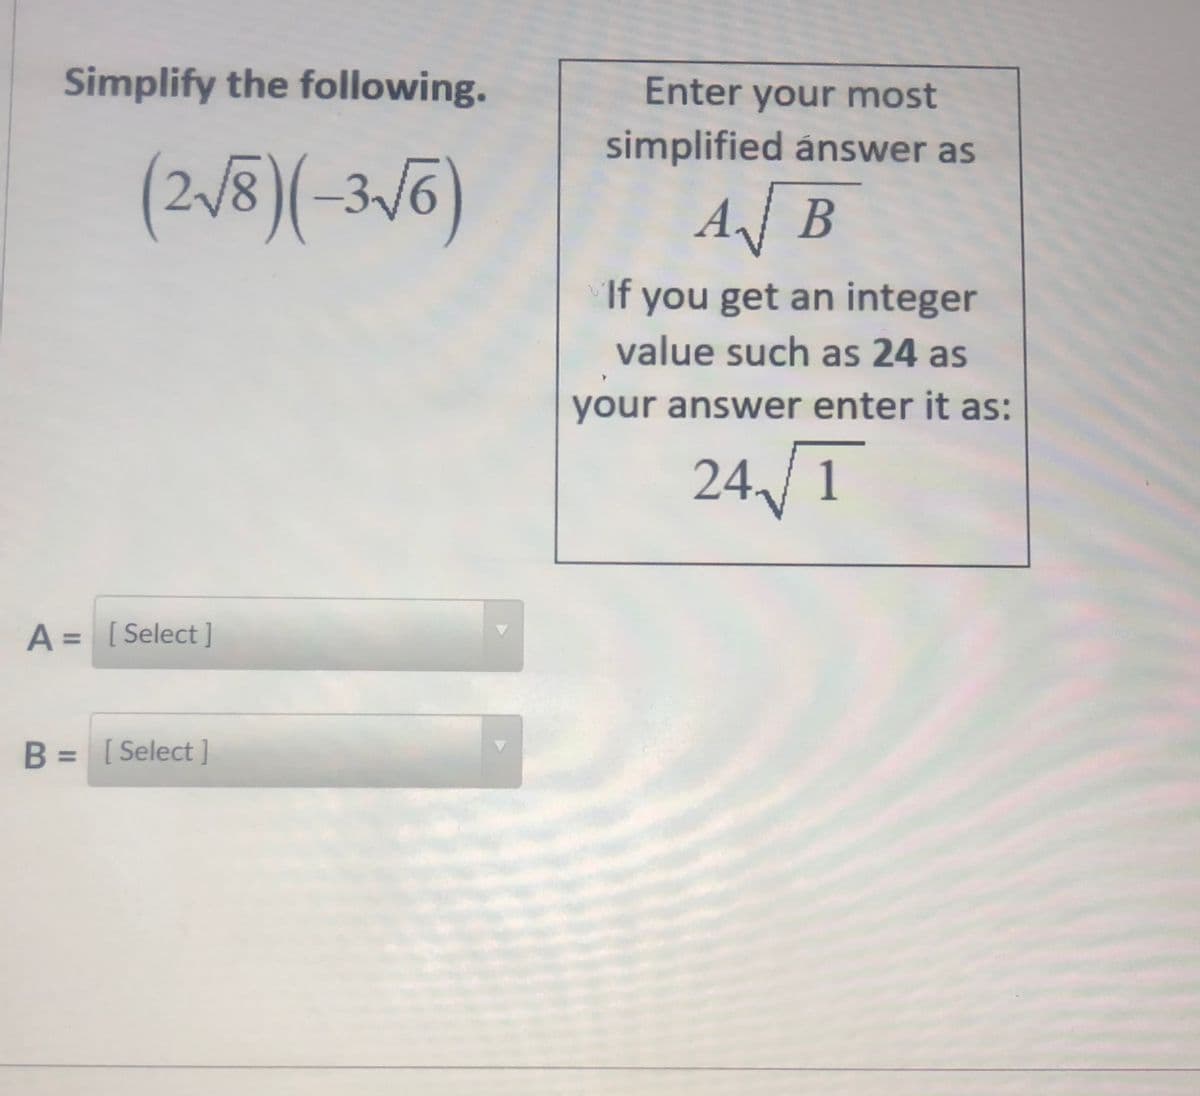 Simplify the following.
Enter your most
simplified ánswer as
(2,/8)(-3,56)
3/6
AB
If you get an integer
value such as 24 as
your answer enter it as:
24,/1
A = [ Select]
B = [ Select ]
